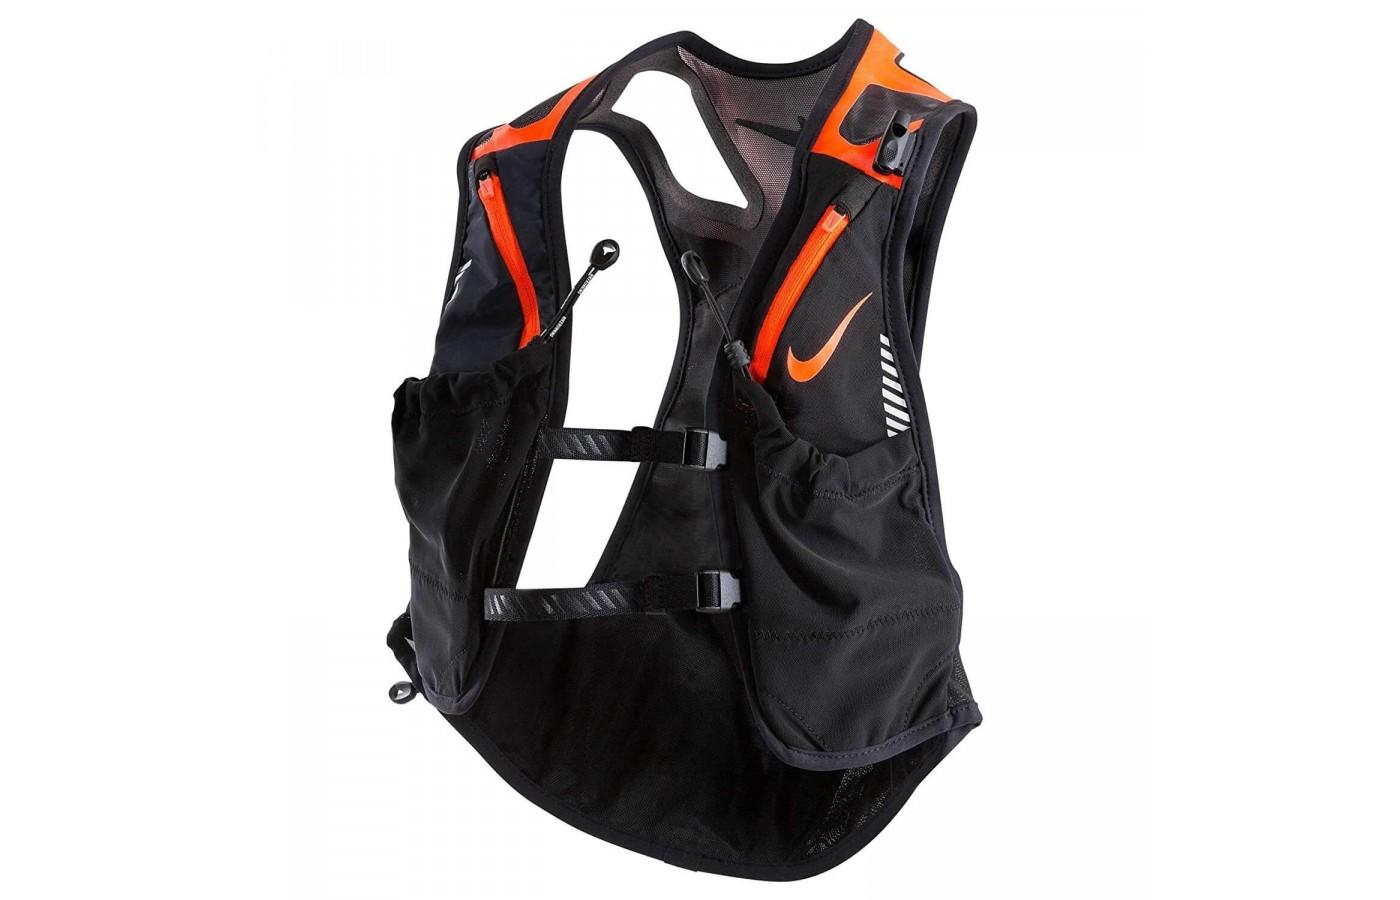 here's a look at Nike's first hydration vest